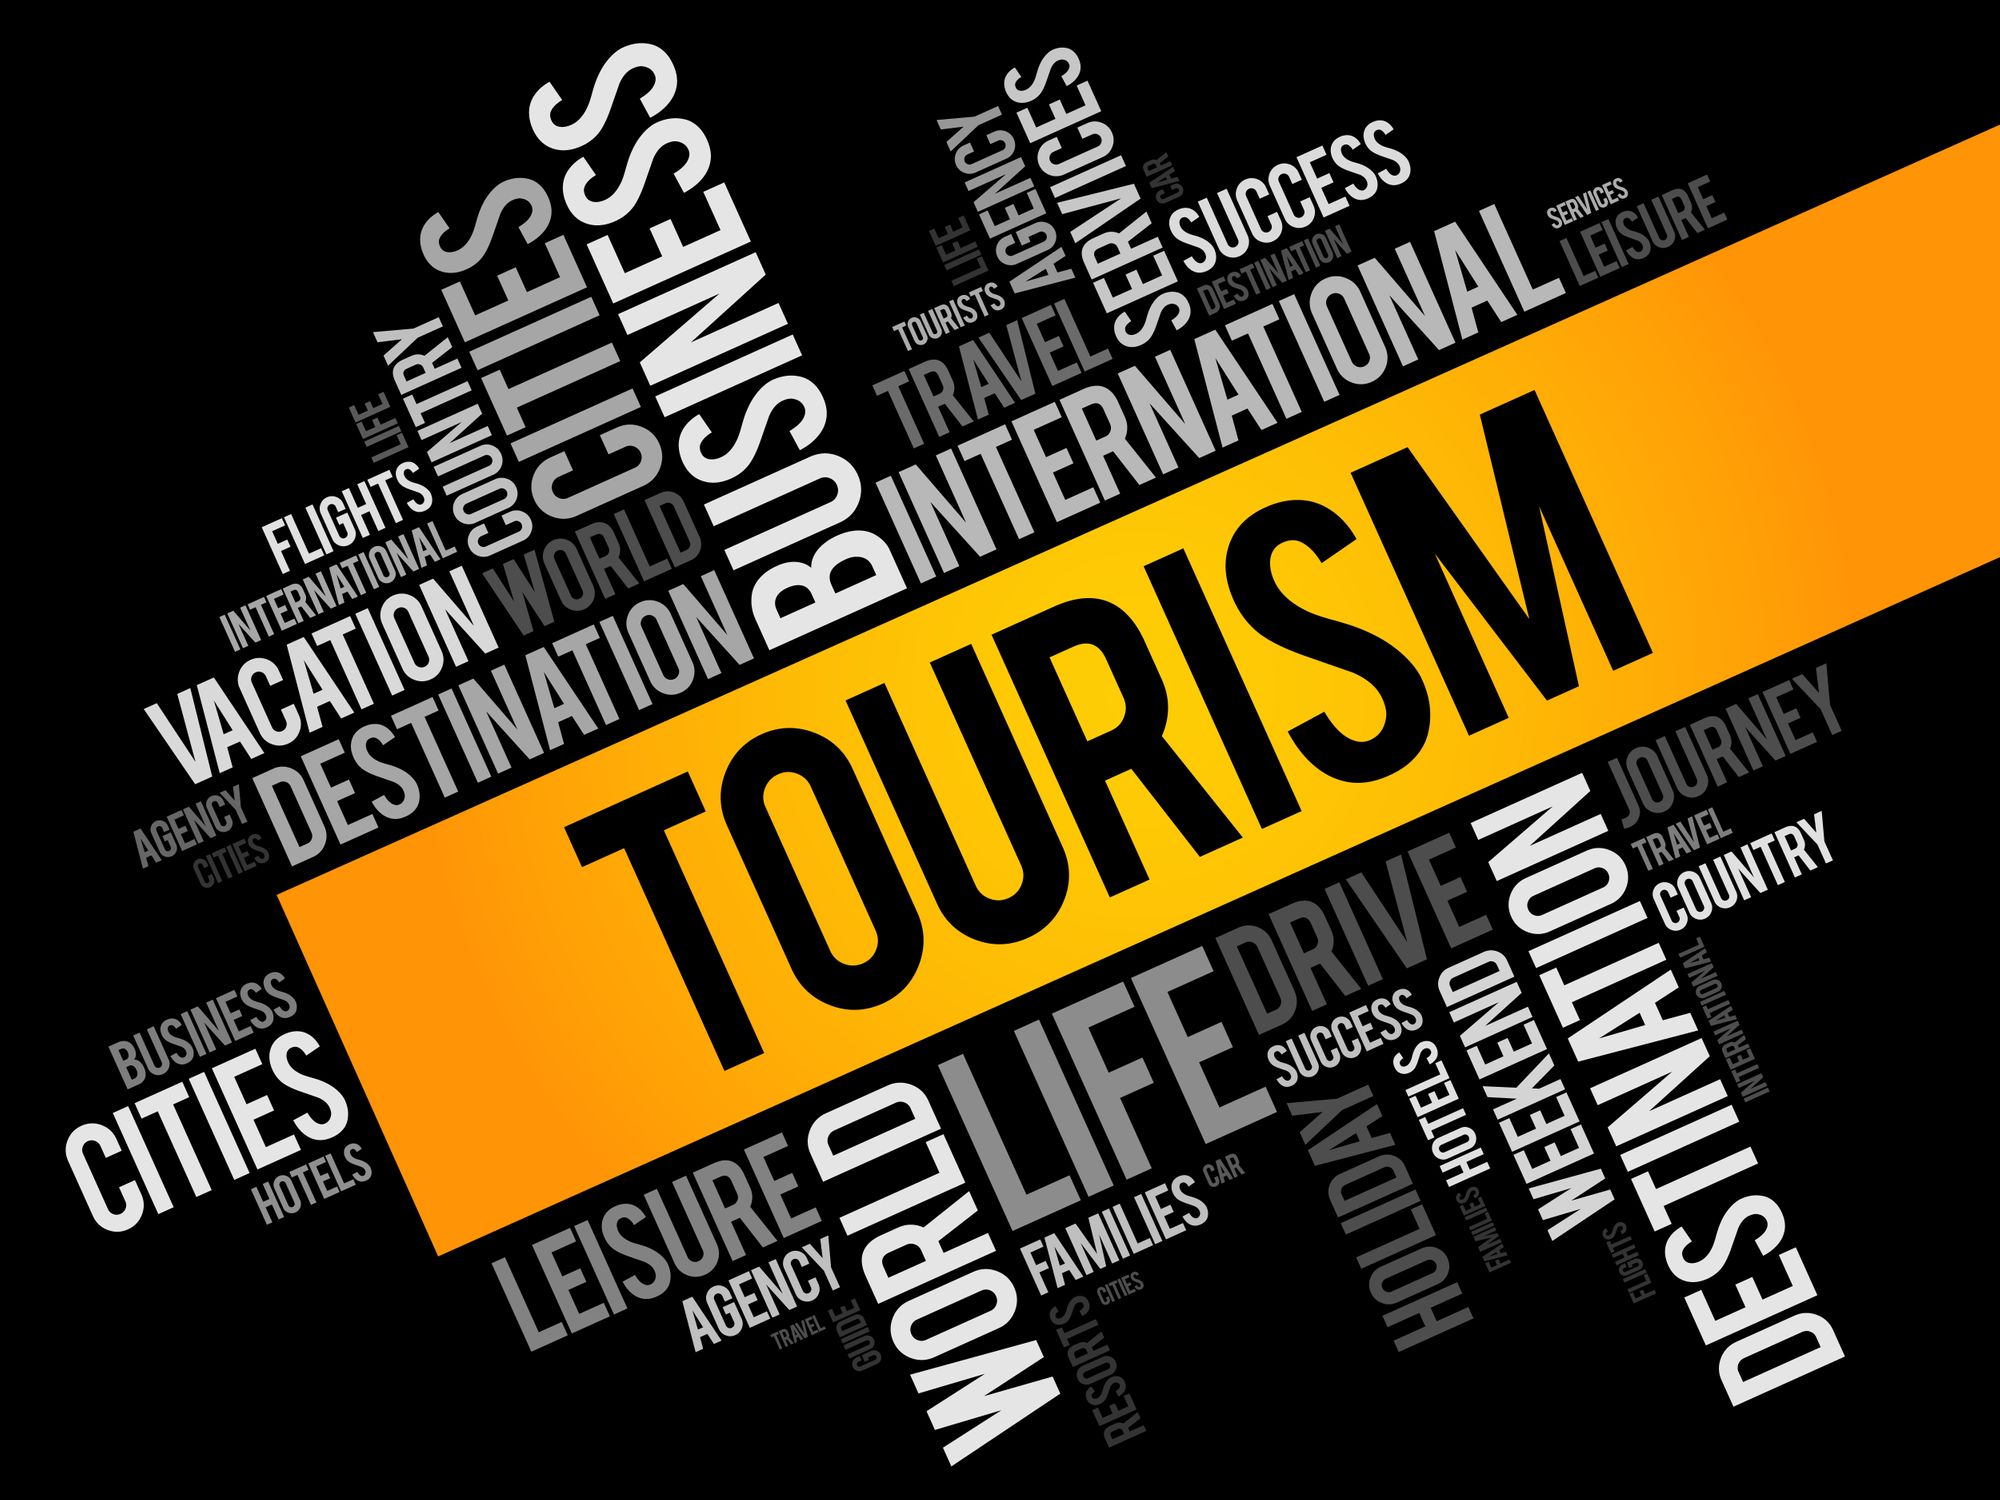 tourism industry business